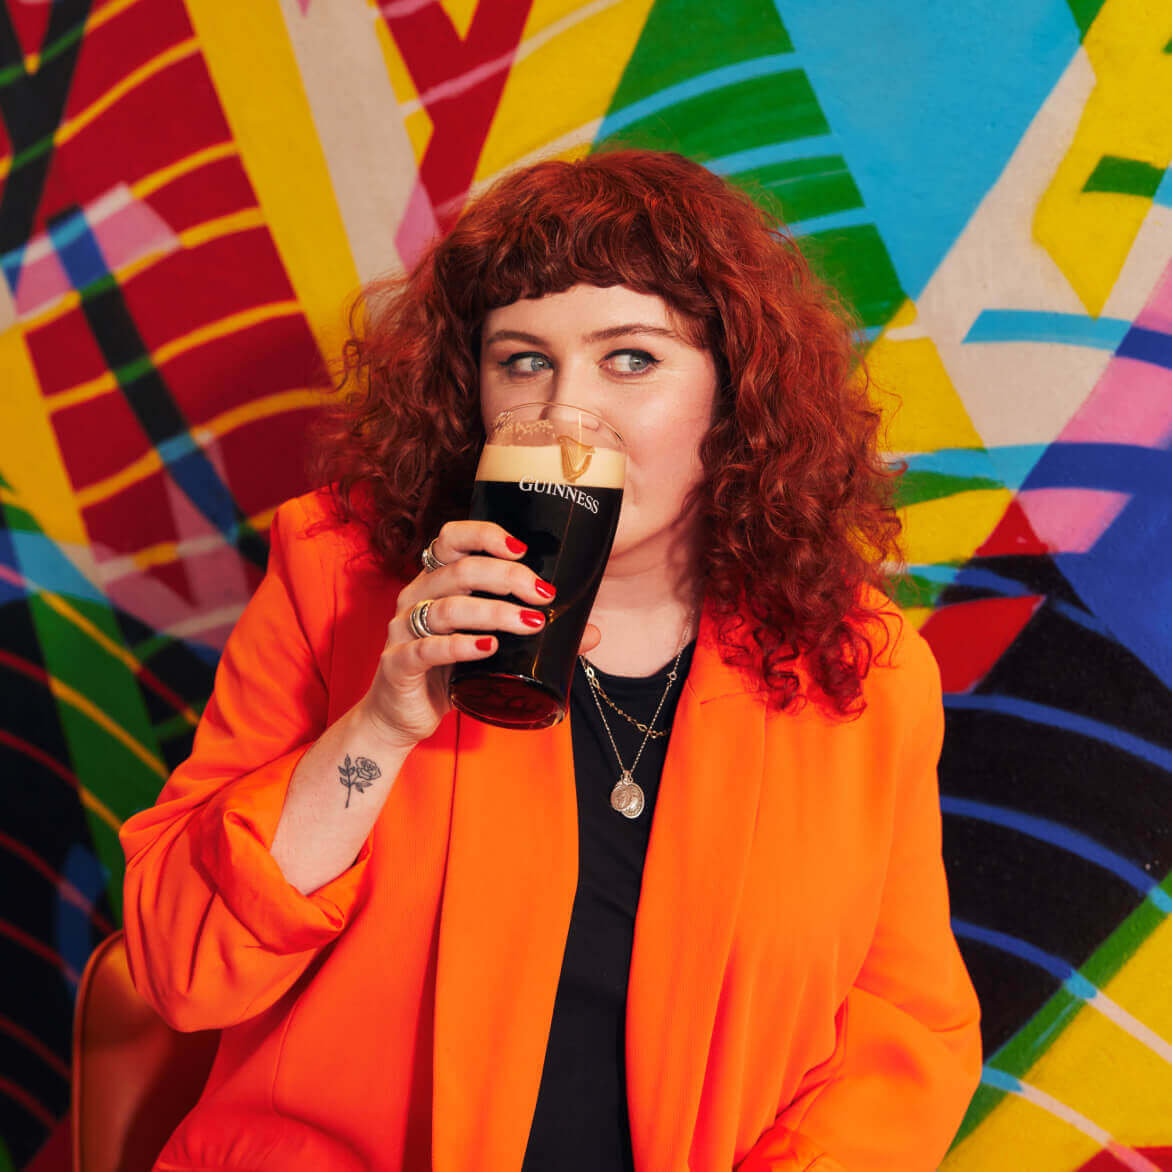 Woman wearing a orange suit drinking a pint of Guinness 